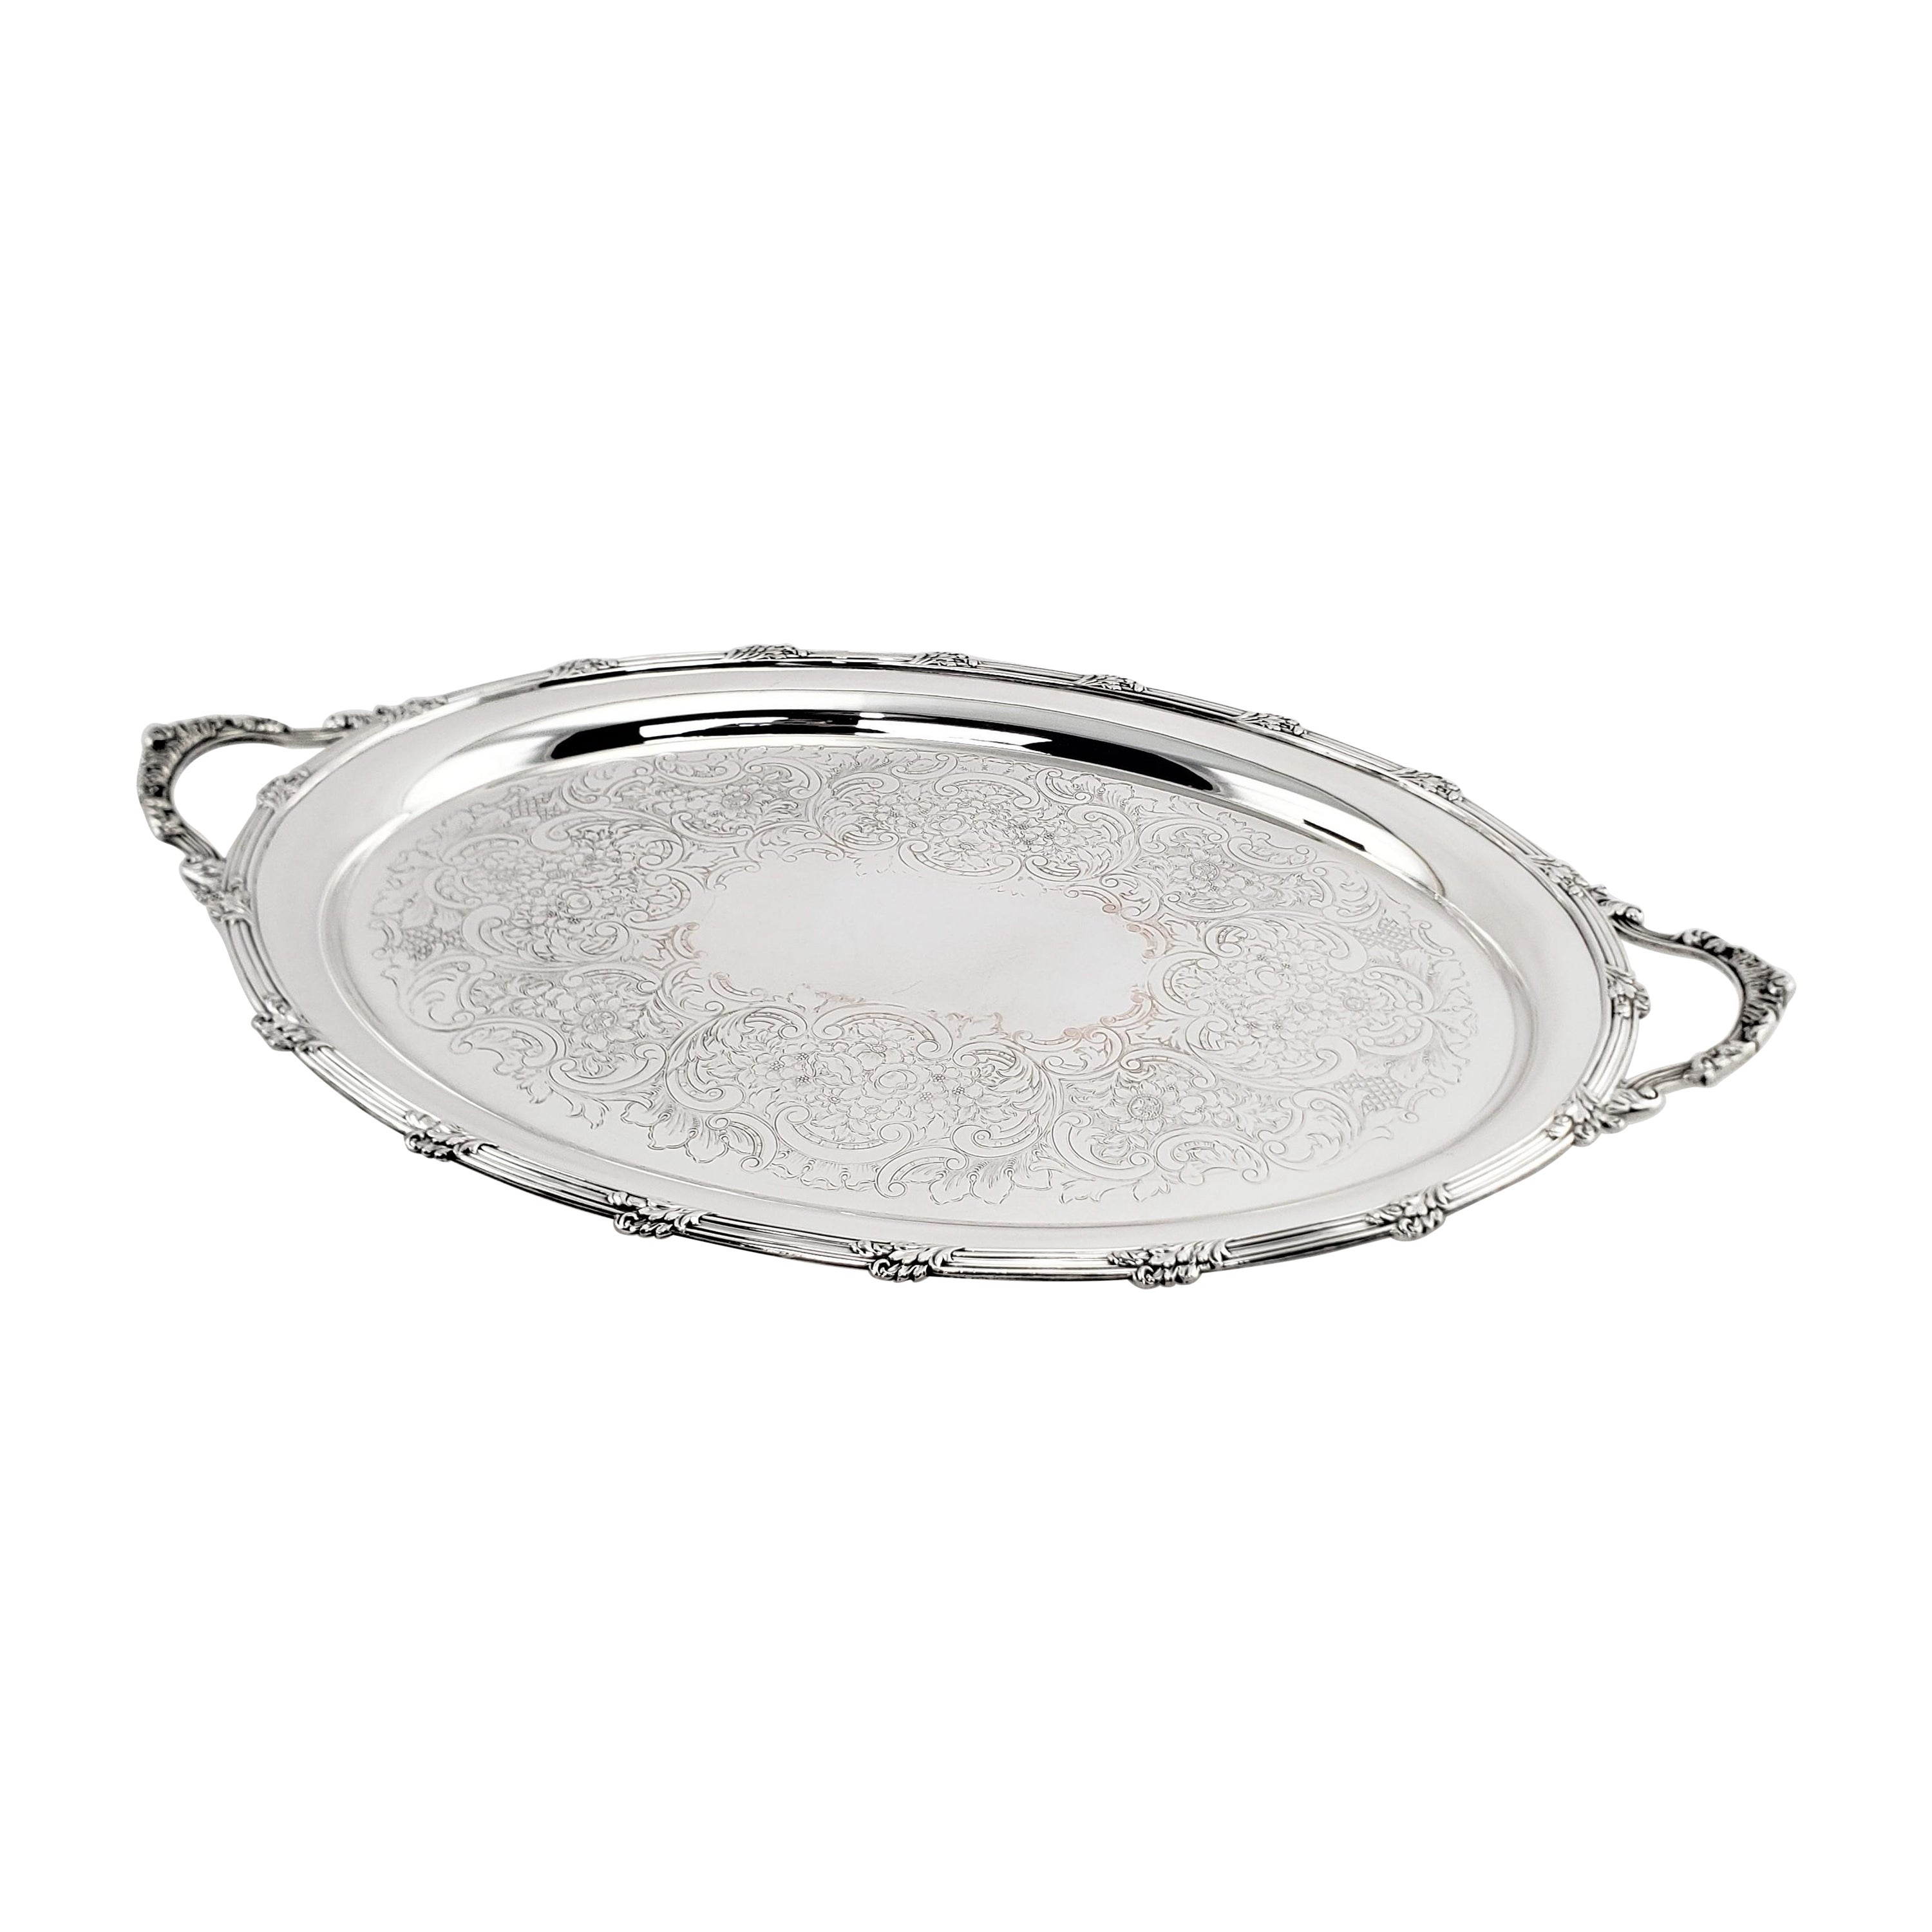 Large Antique Barker-Ellis English Oval Silver Plated Serving Tray